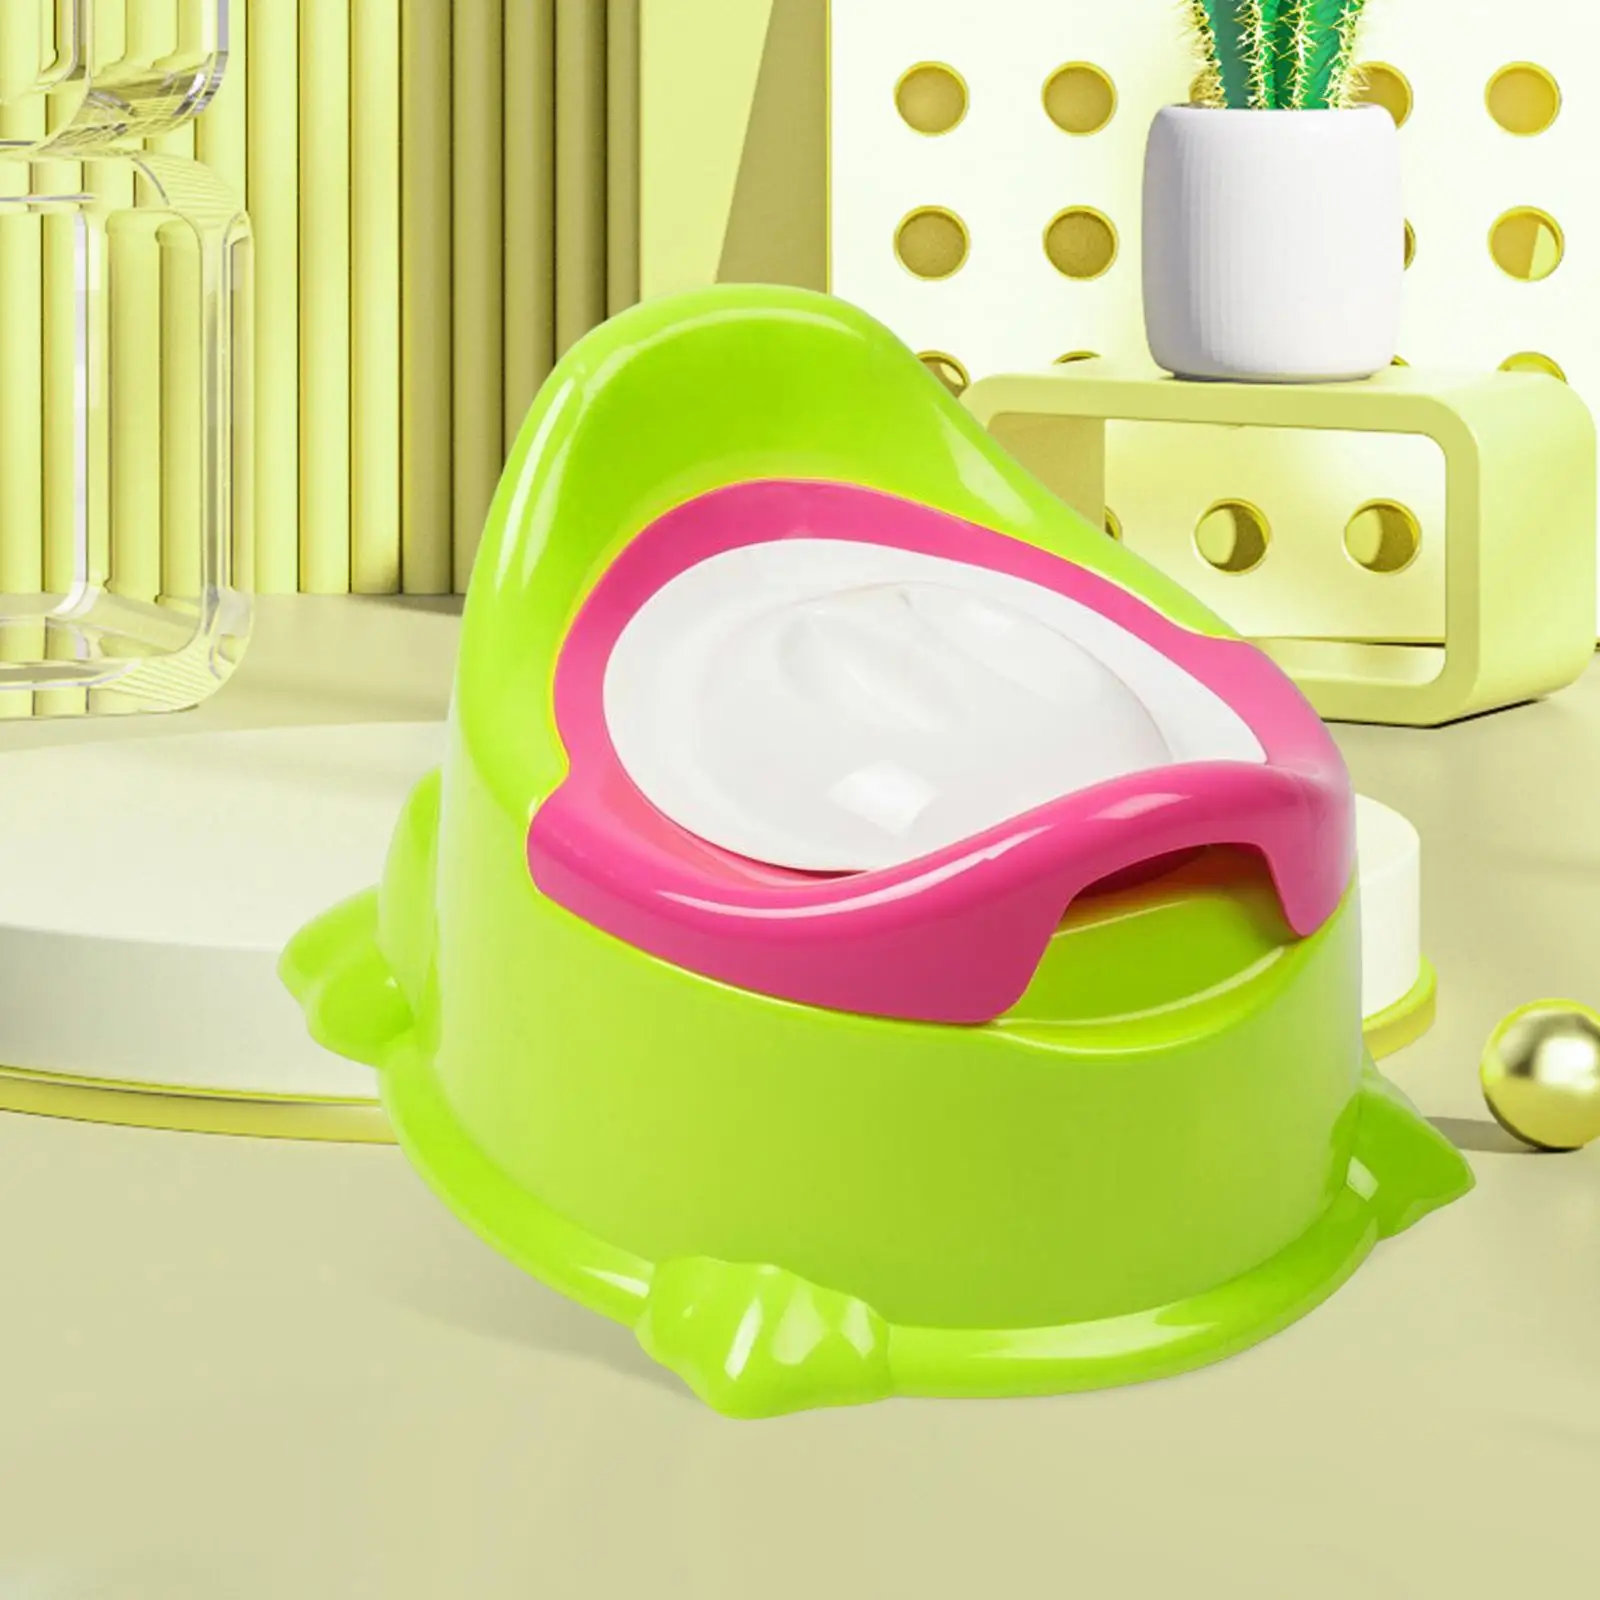 Child Potty Trainer Training Toilet Seat Baby Potty Chair for Babies 6-12 Month